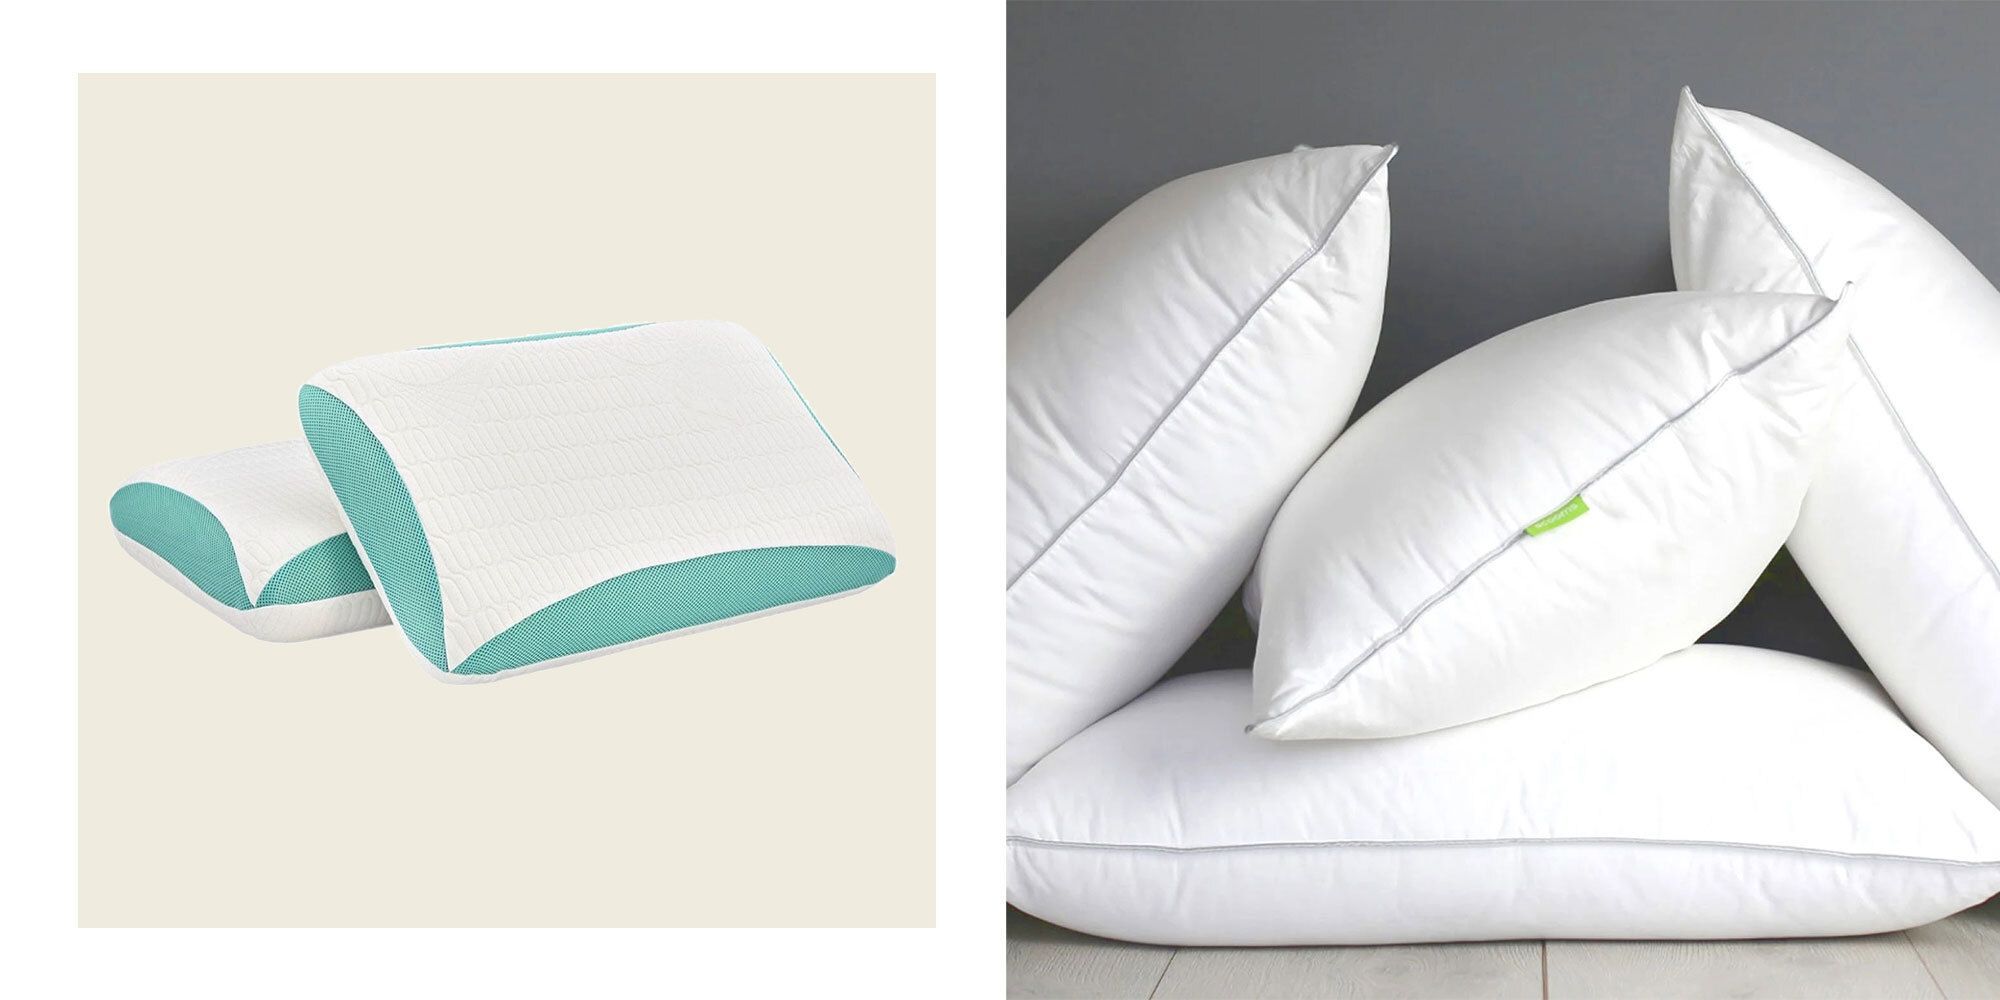 The Best Pillows for Side Sleepers